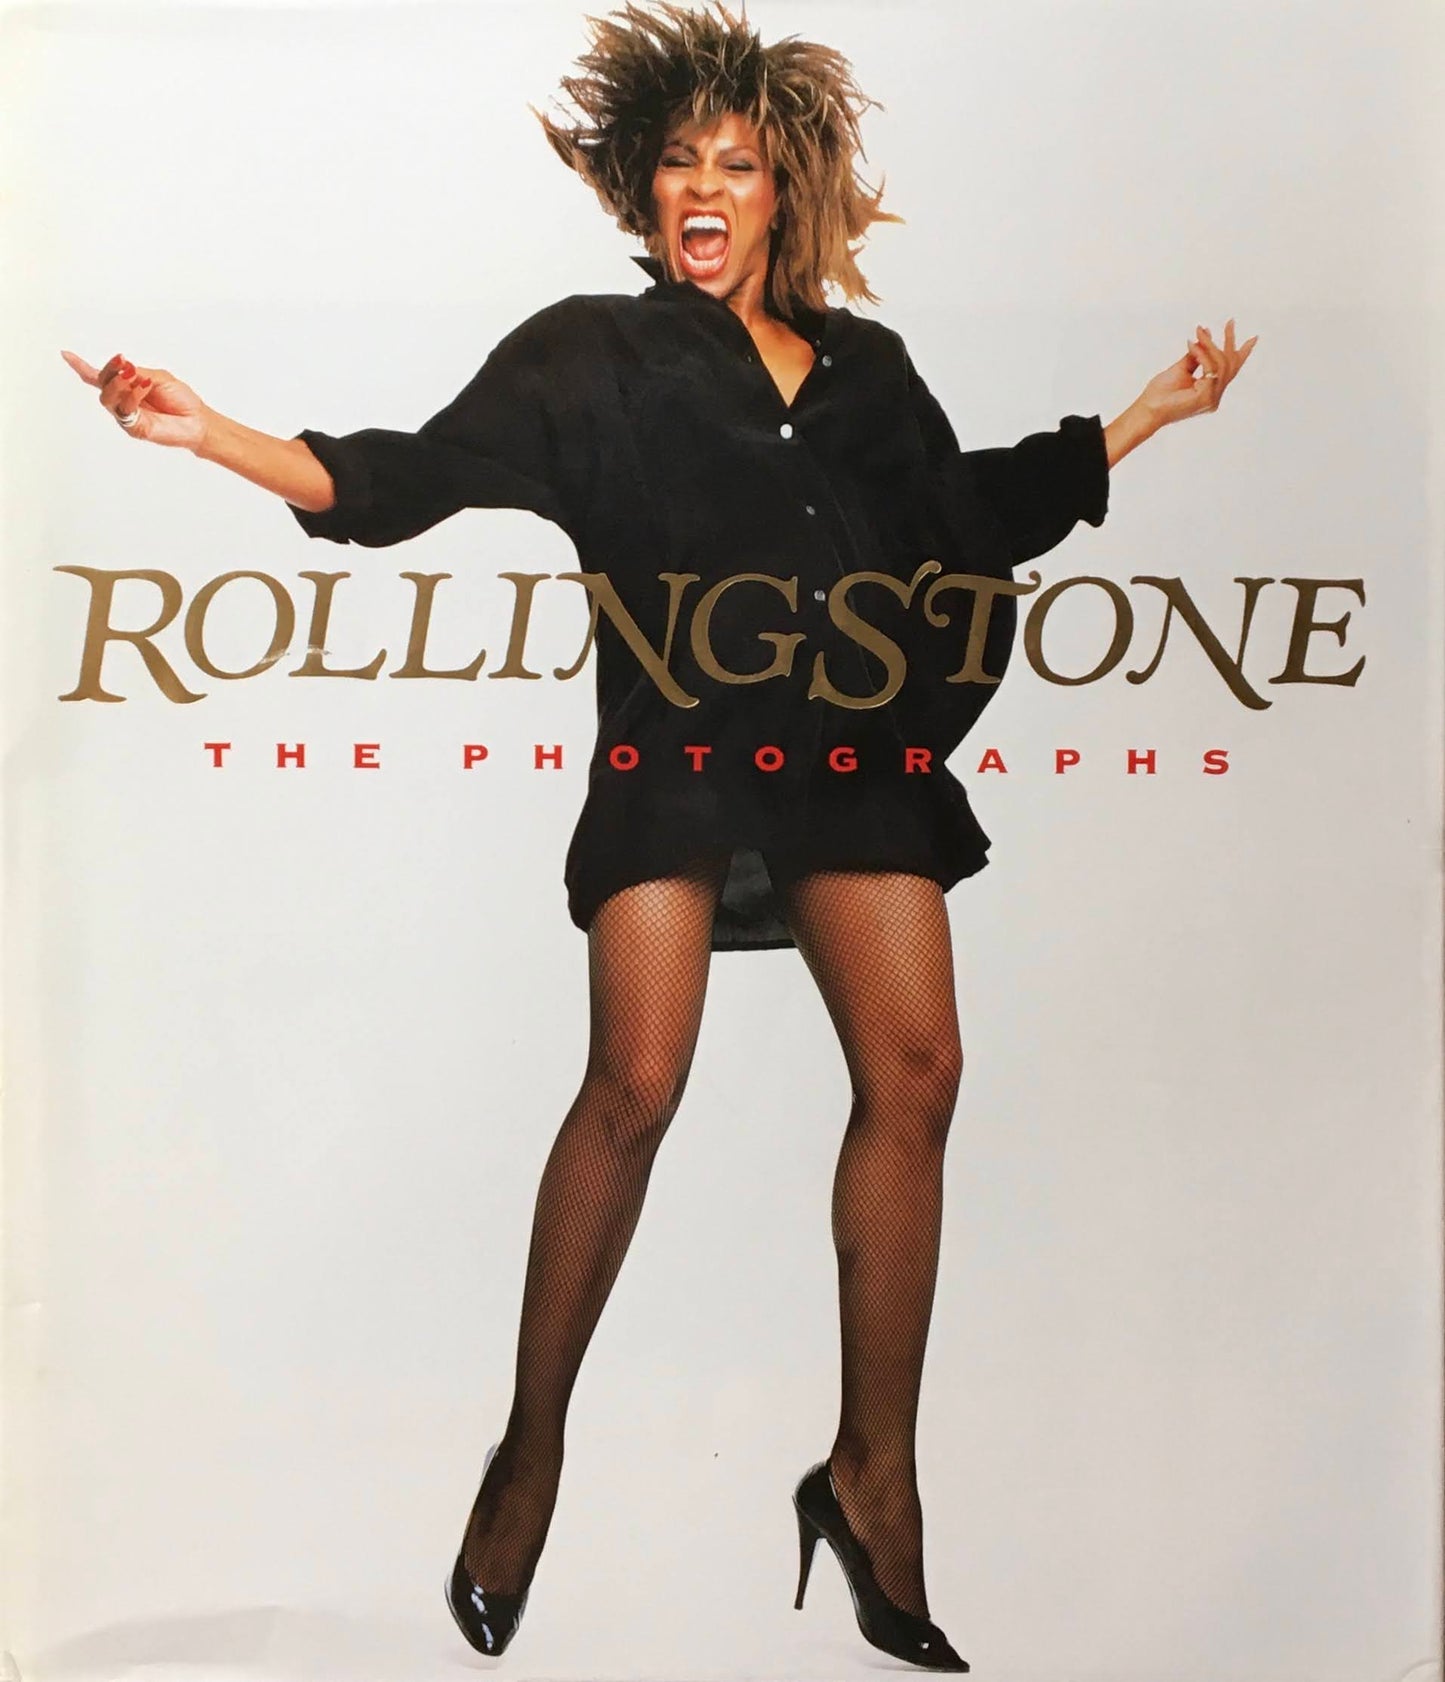 ROLLINGSTONE THE PHOTOGRAPHS